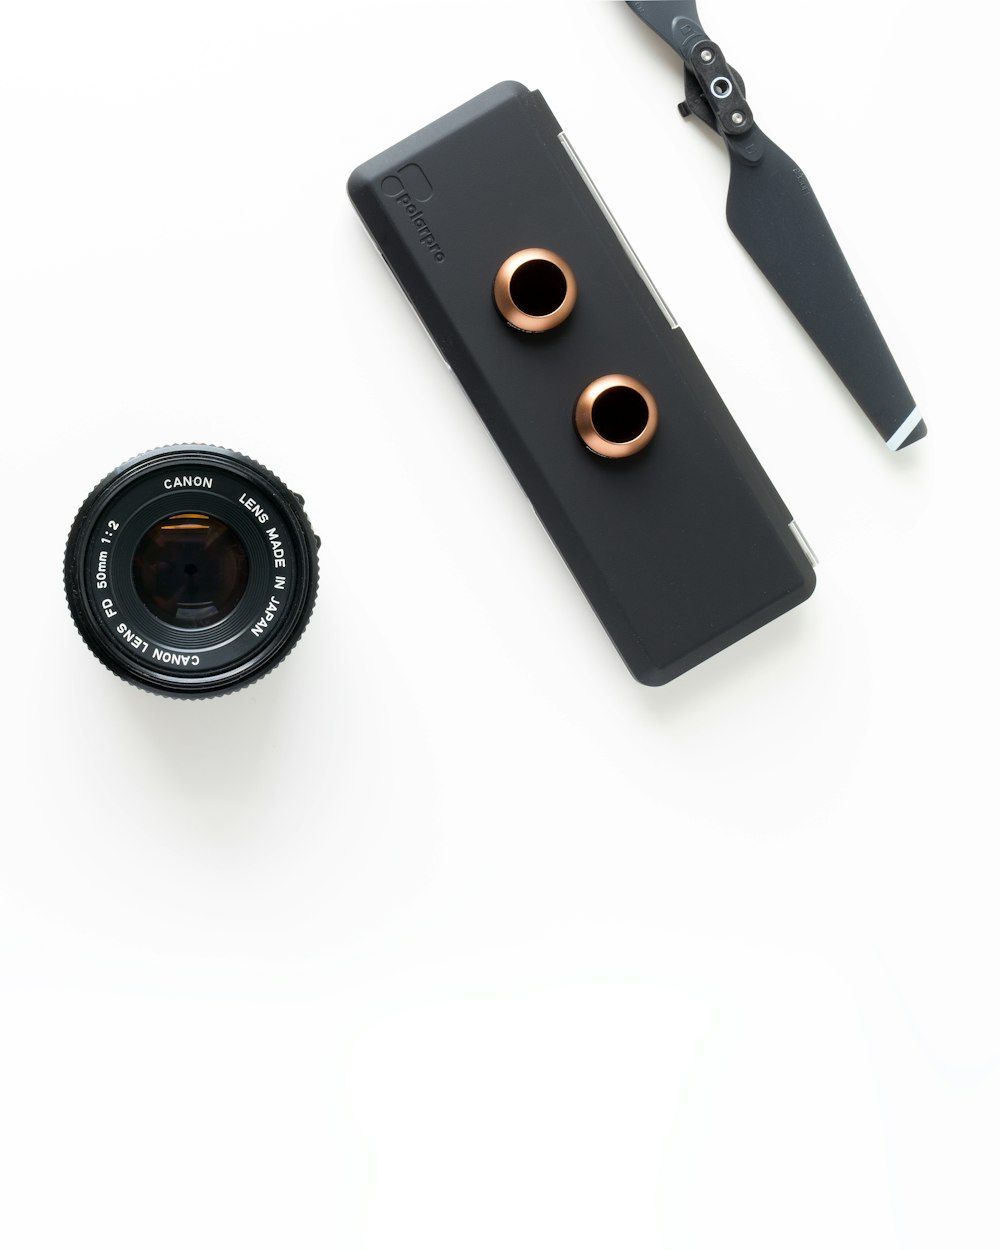 closeup photo of black camera attachments on white surface